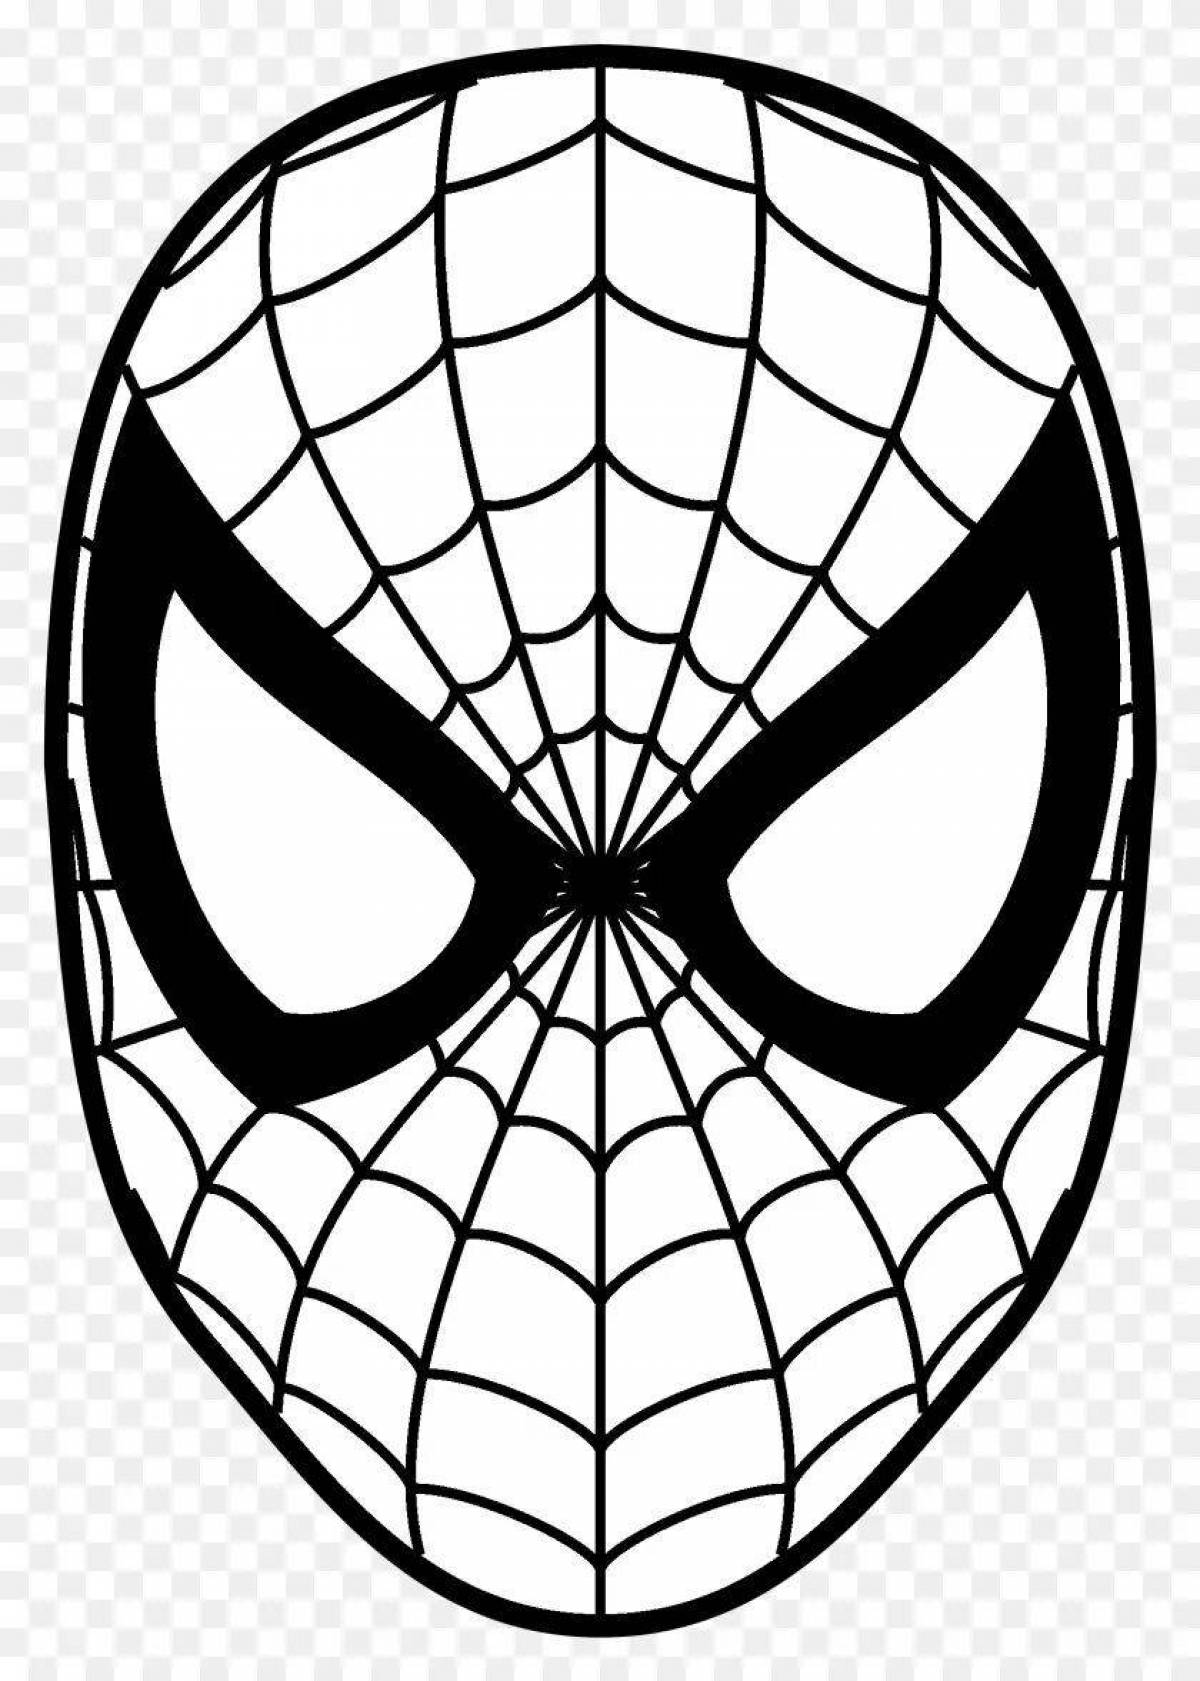 Spiderman's fun face coloring page